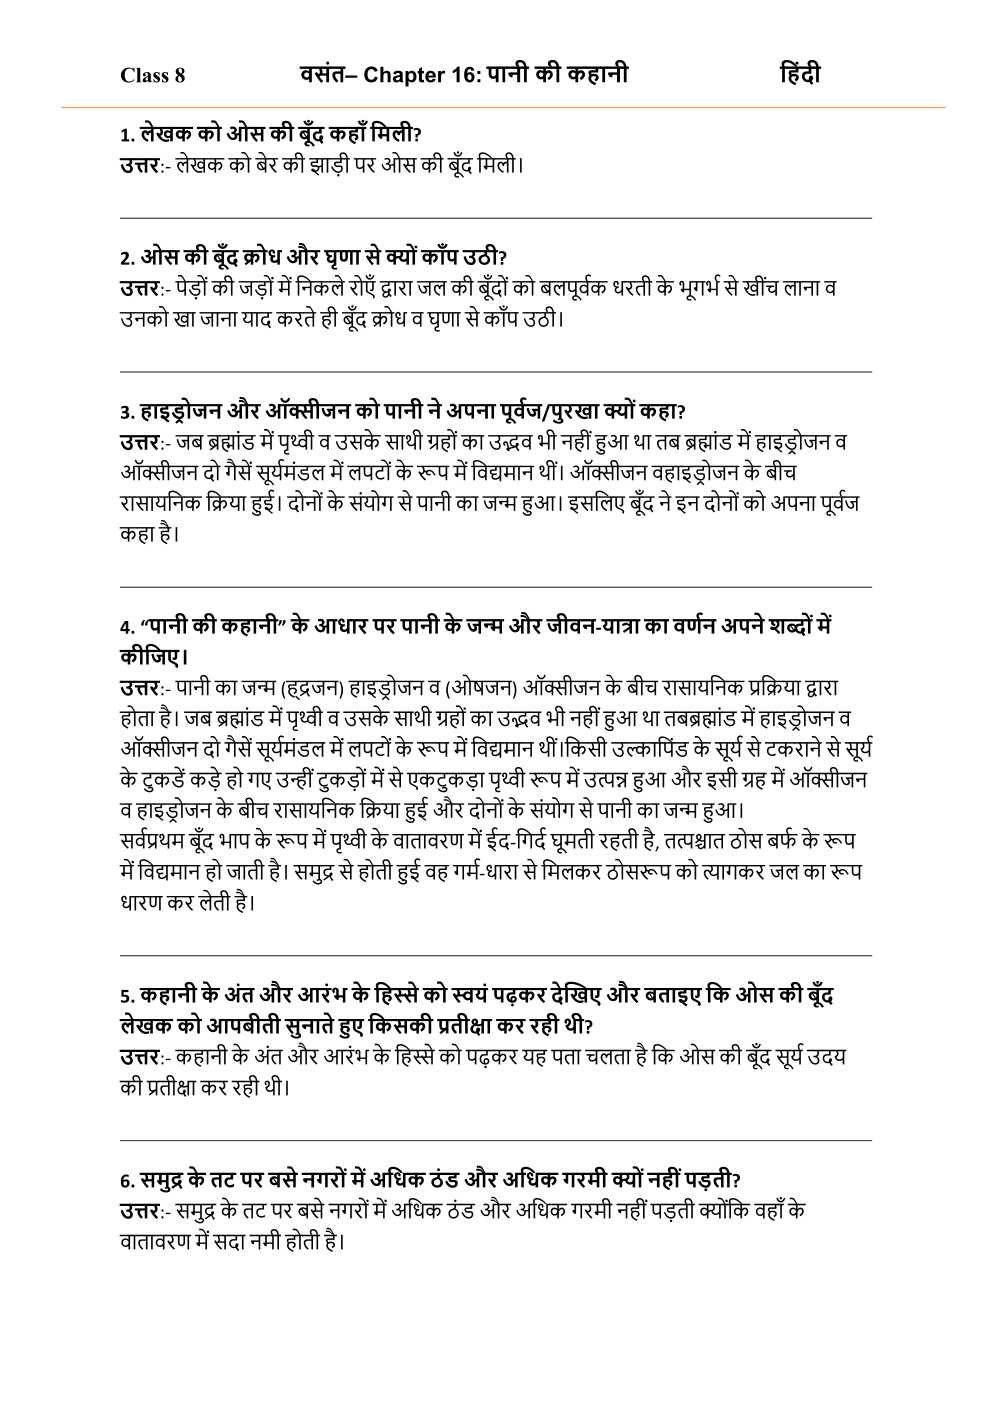 NCERT Solutions For Class 8 Hindi Vasant Chapter 16